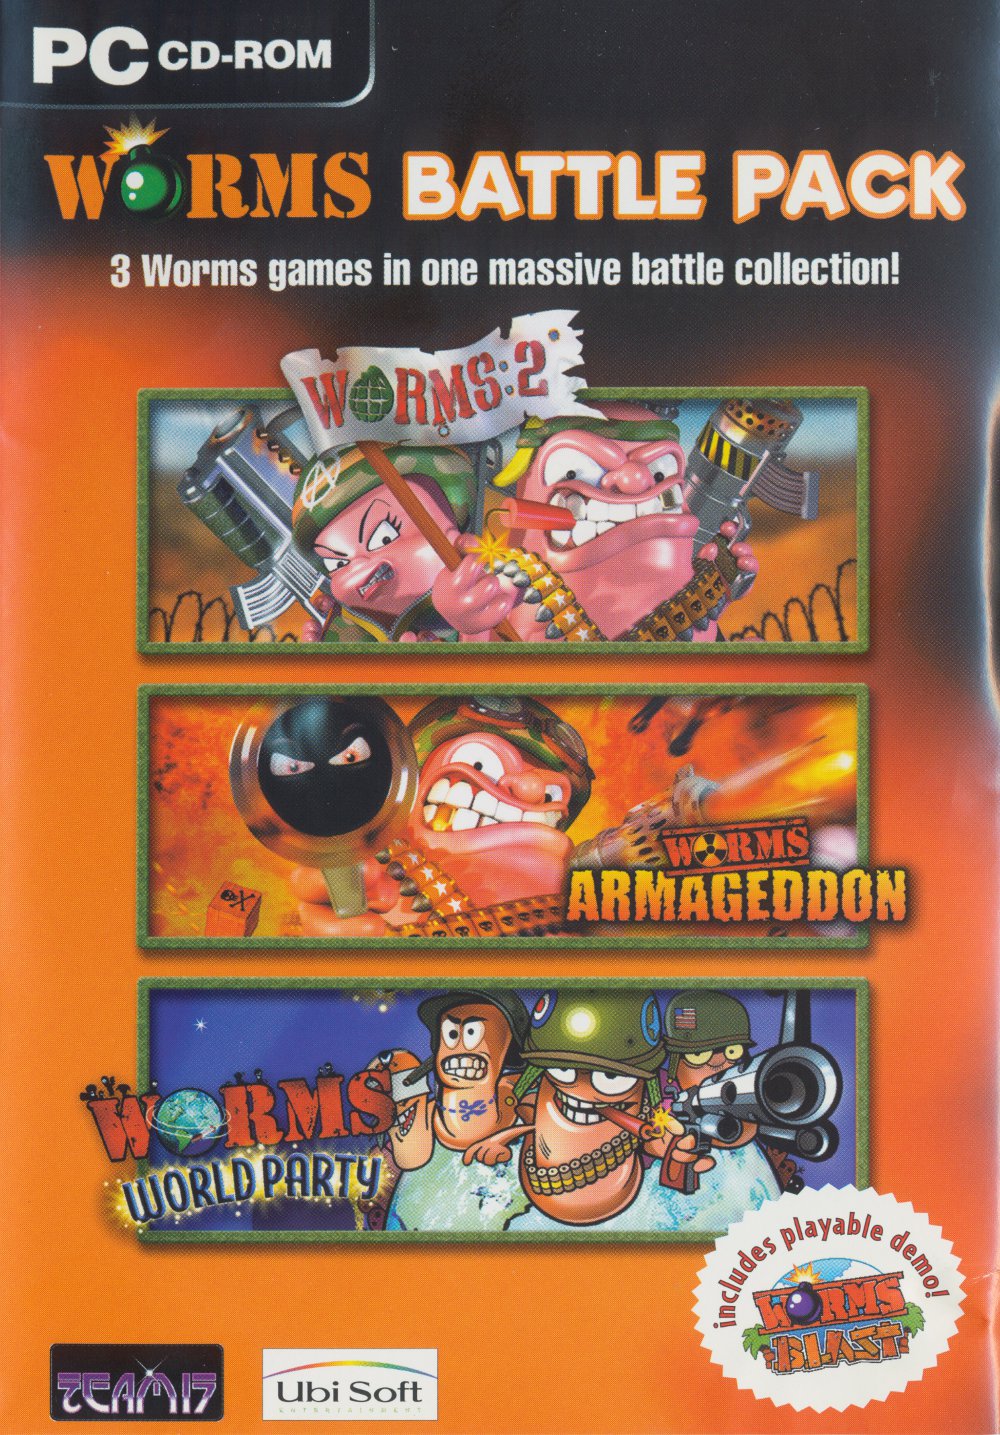 Worms-Battle-Pack-Boxart-Front.jpg